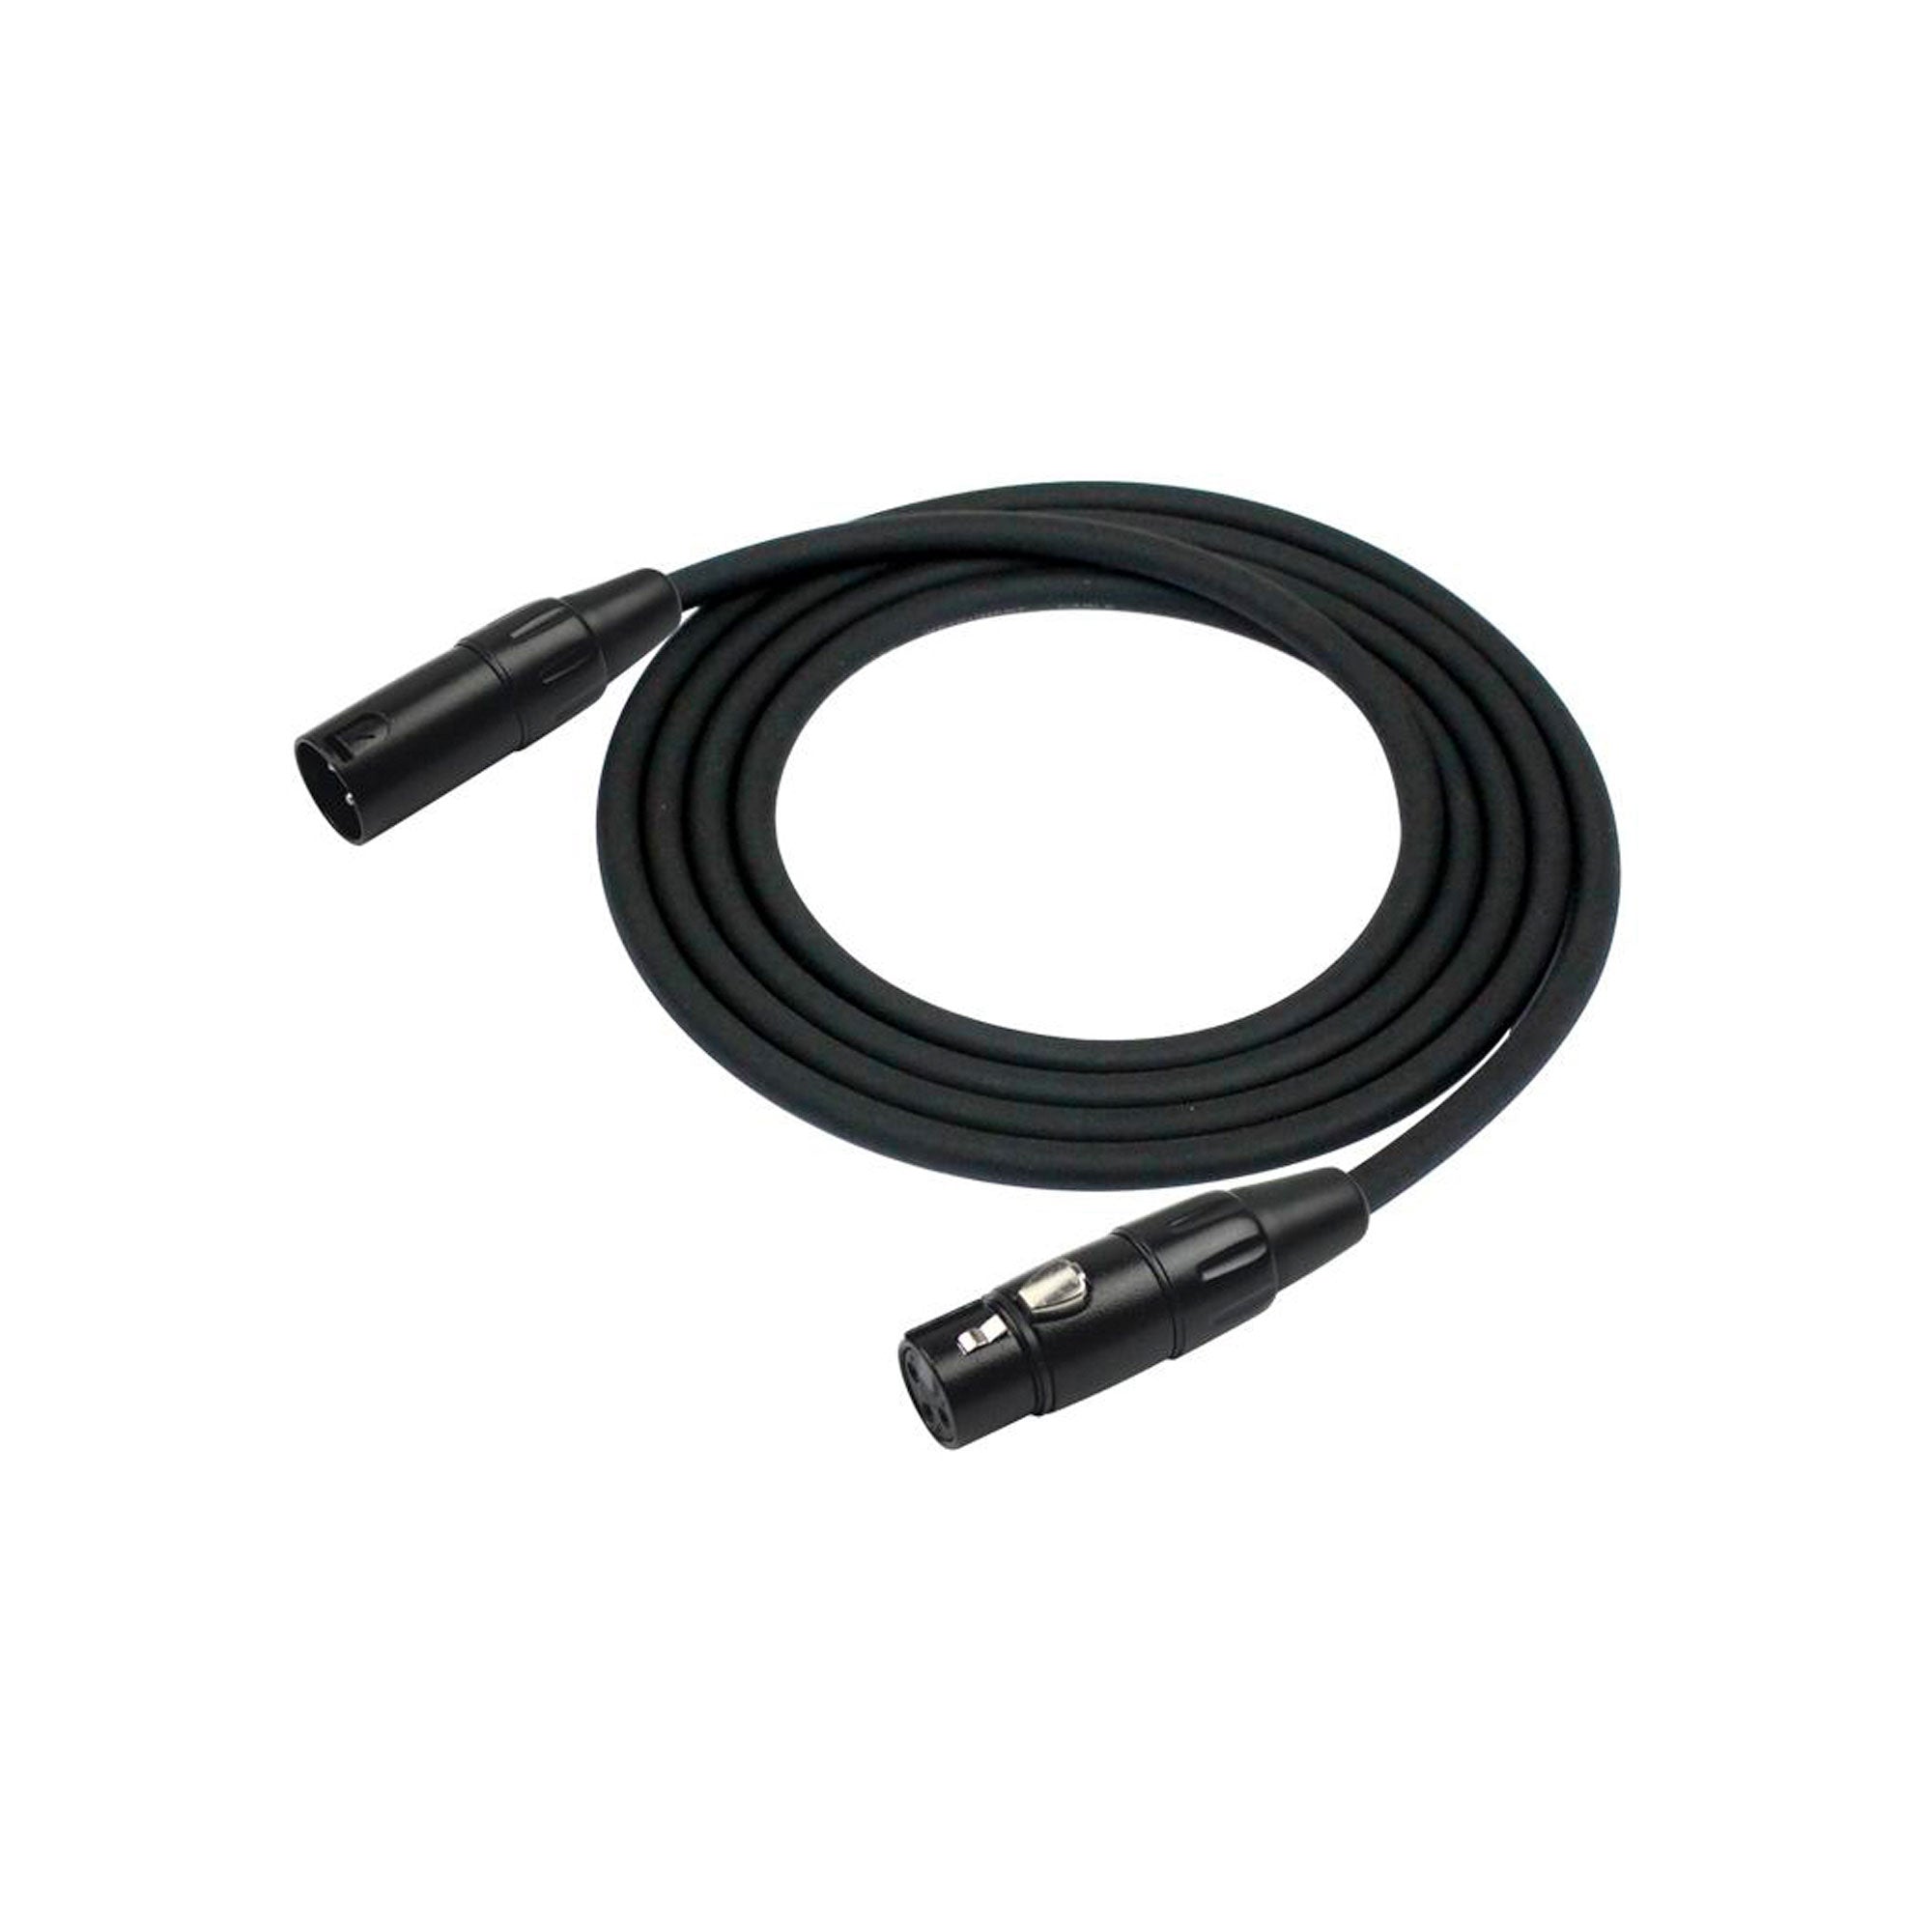 Kirlin Microphone Cable 5M 20AWG XLR M-F Black